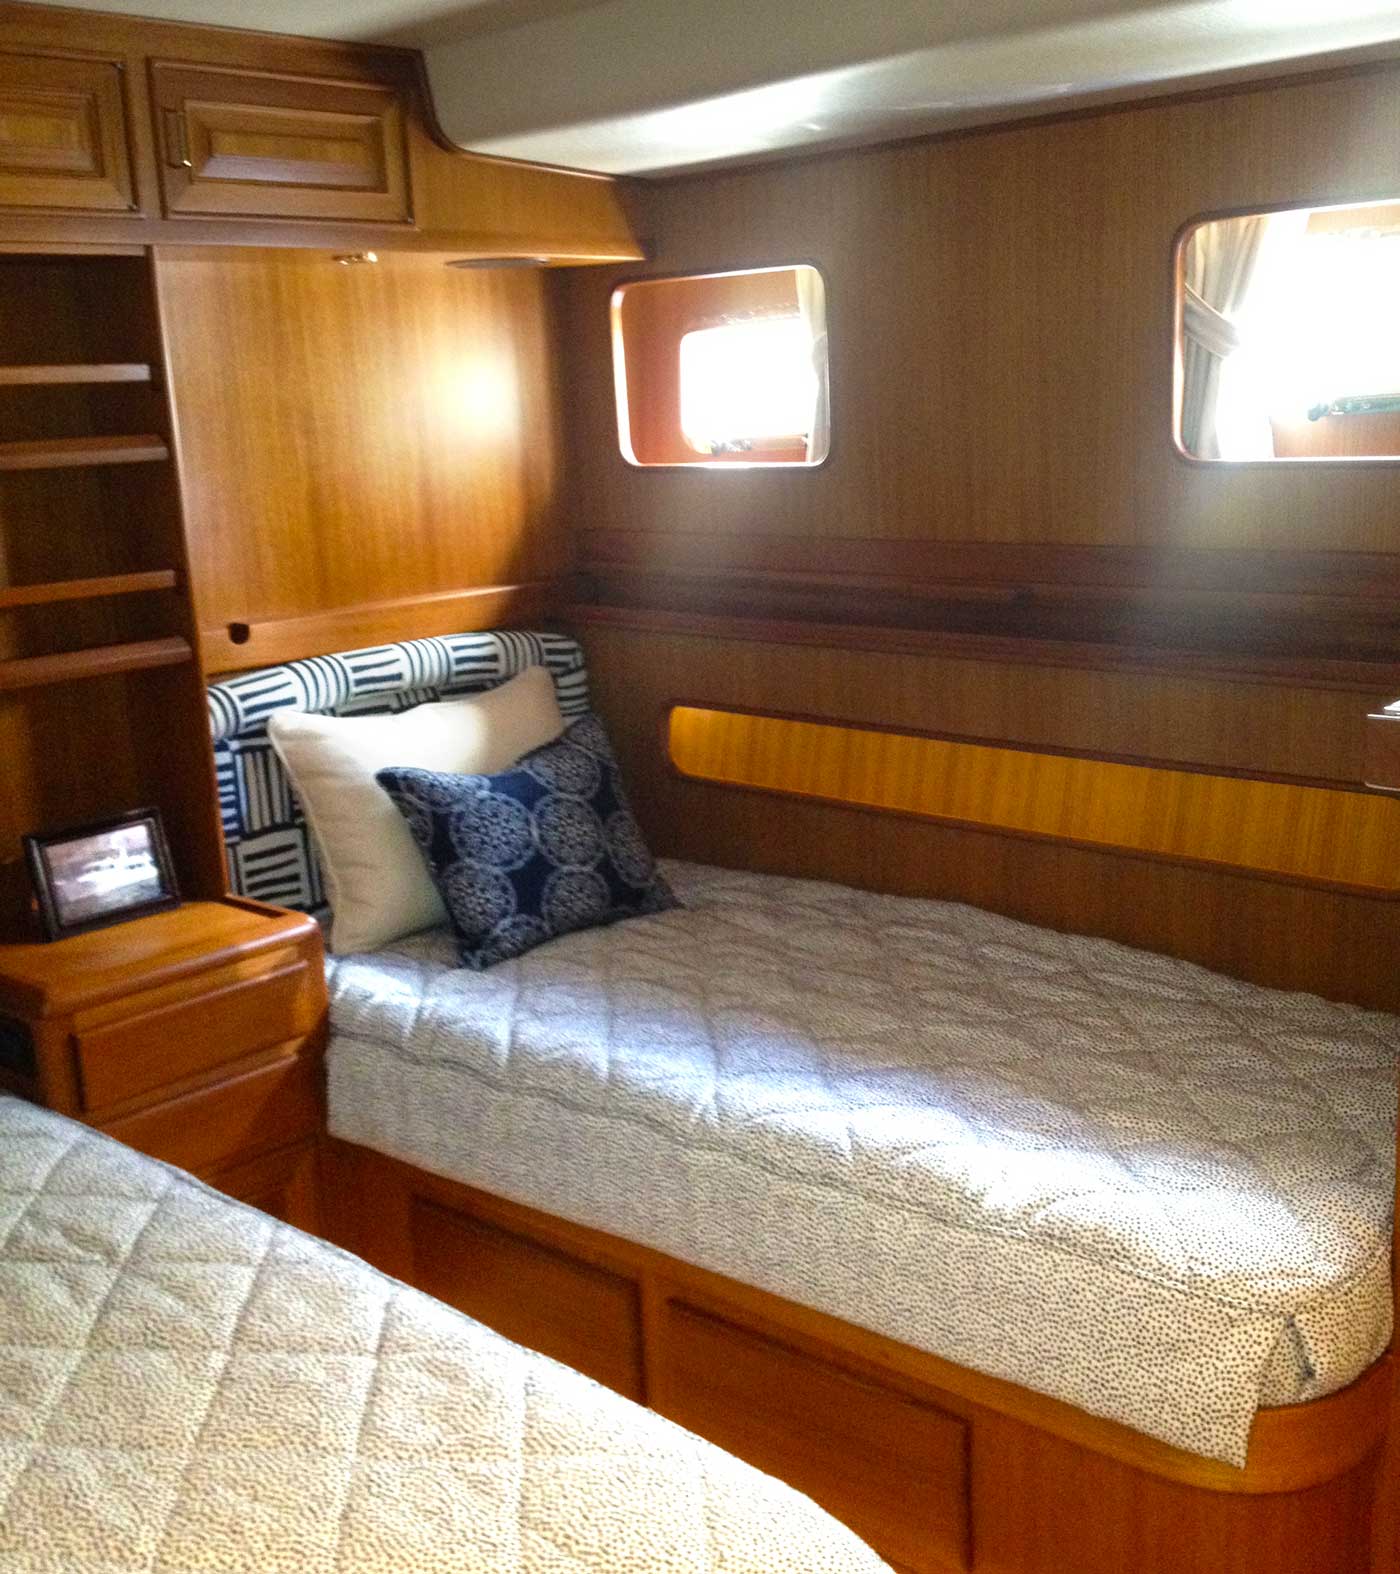 yacht interiors of annapolis